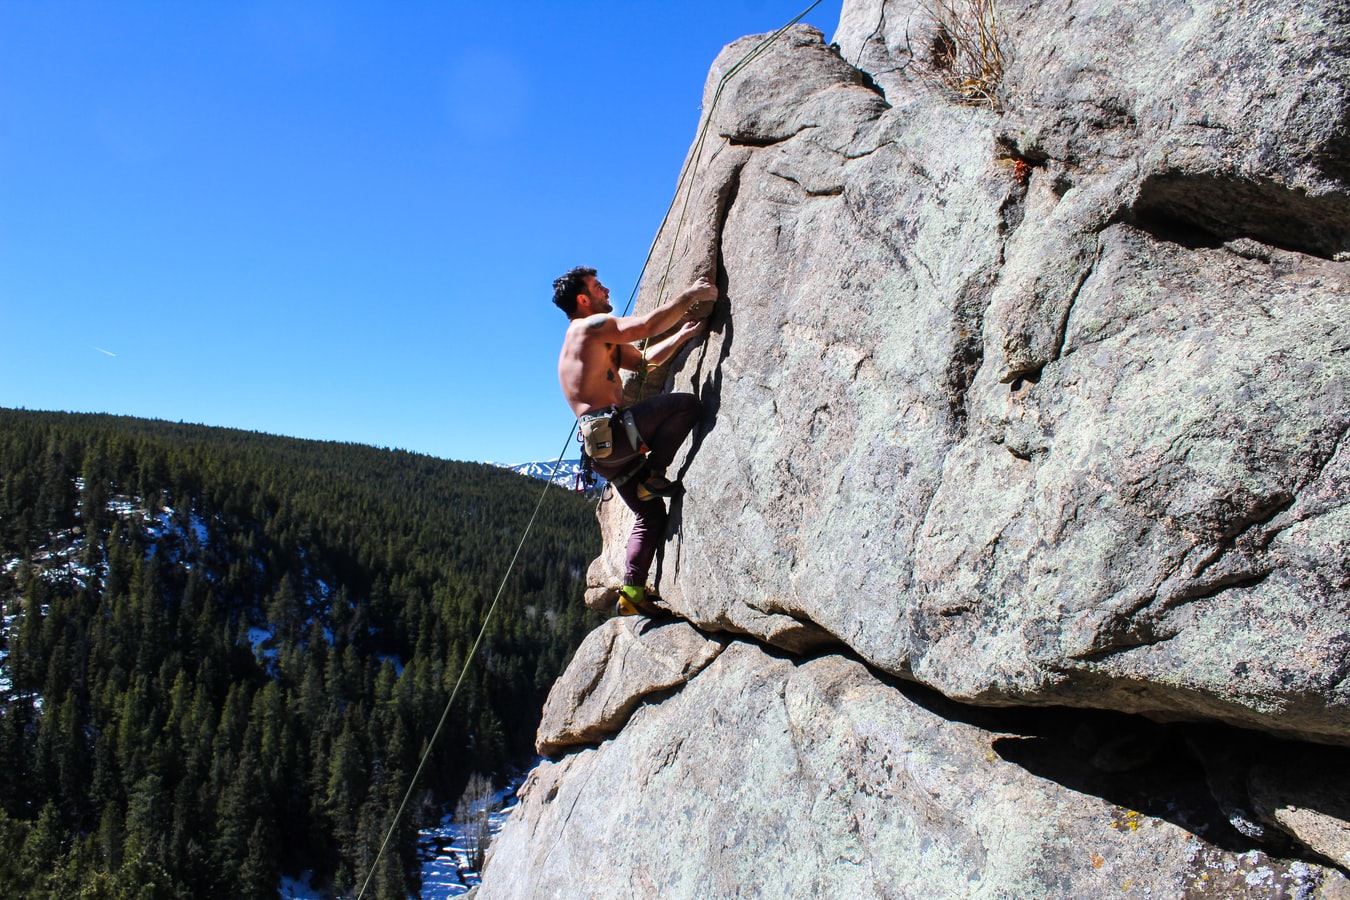 Six Of The Best Places To Go Rock Climbing In The United States